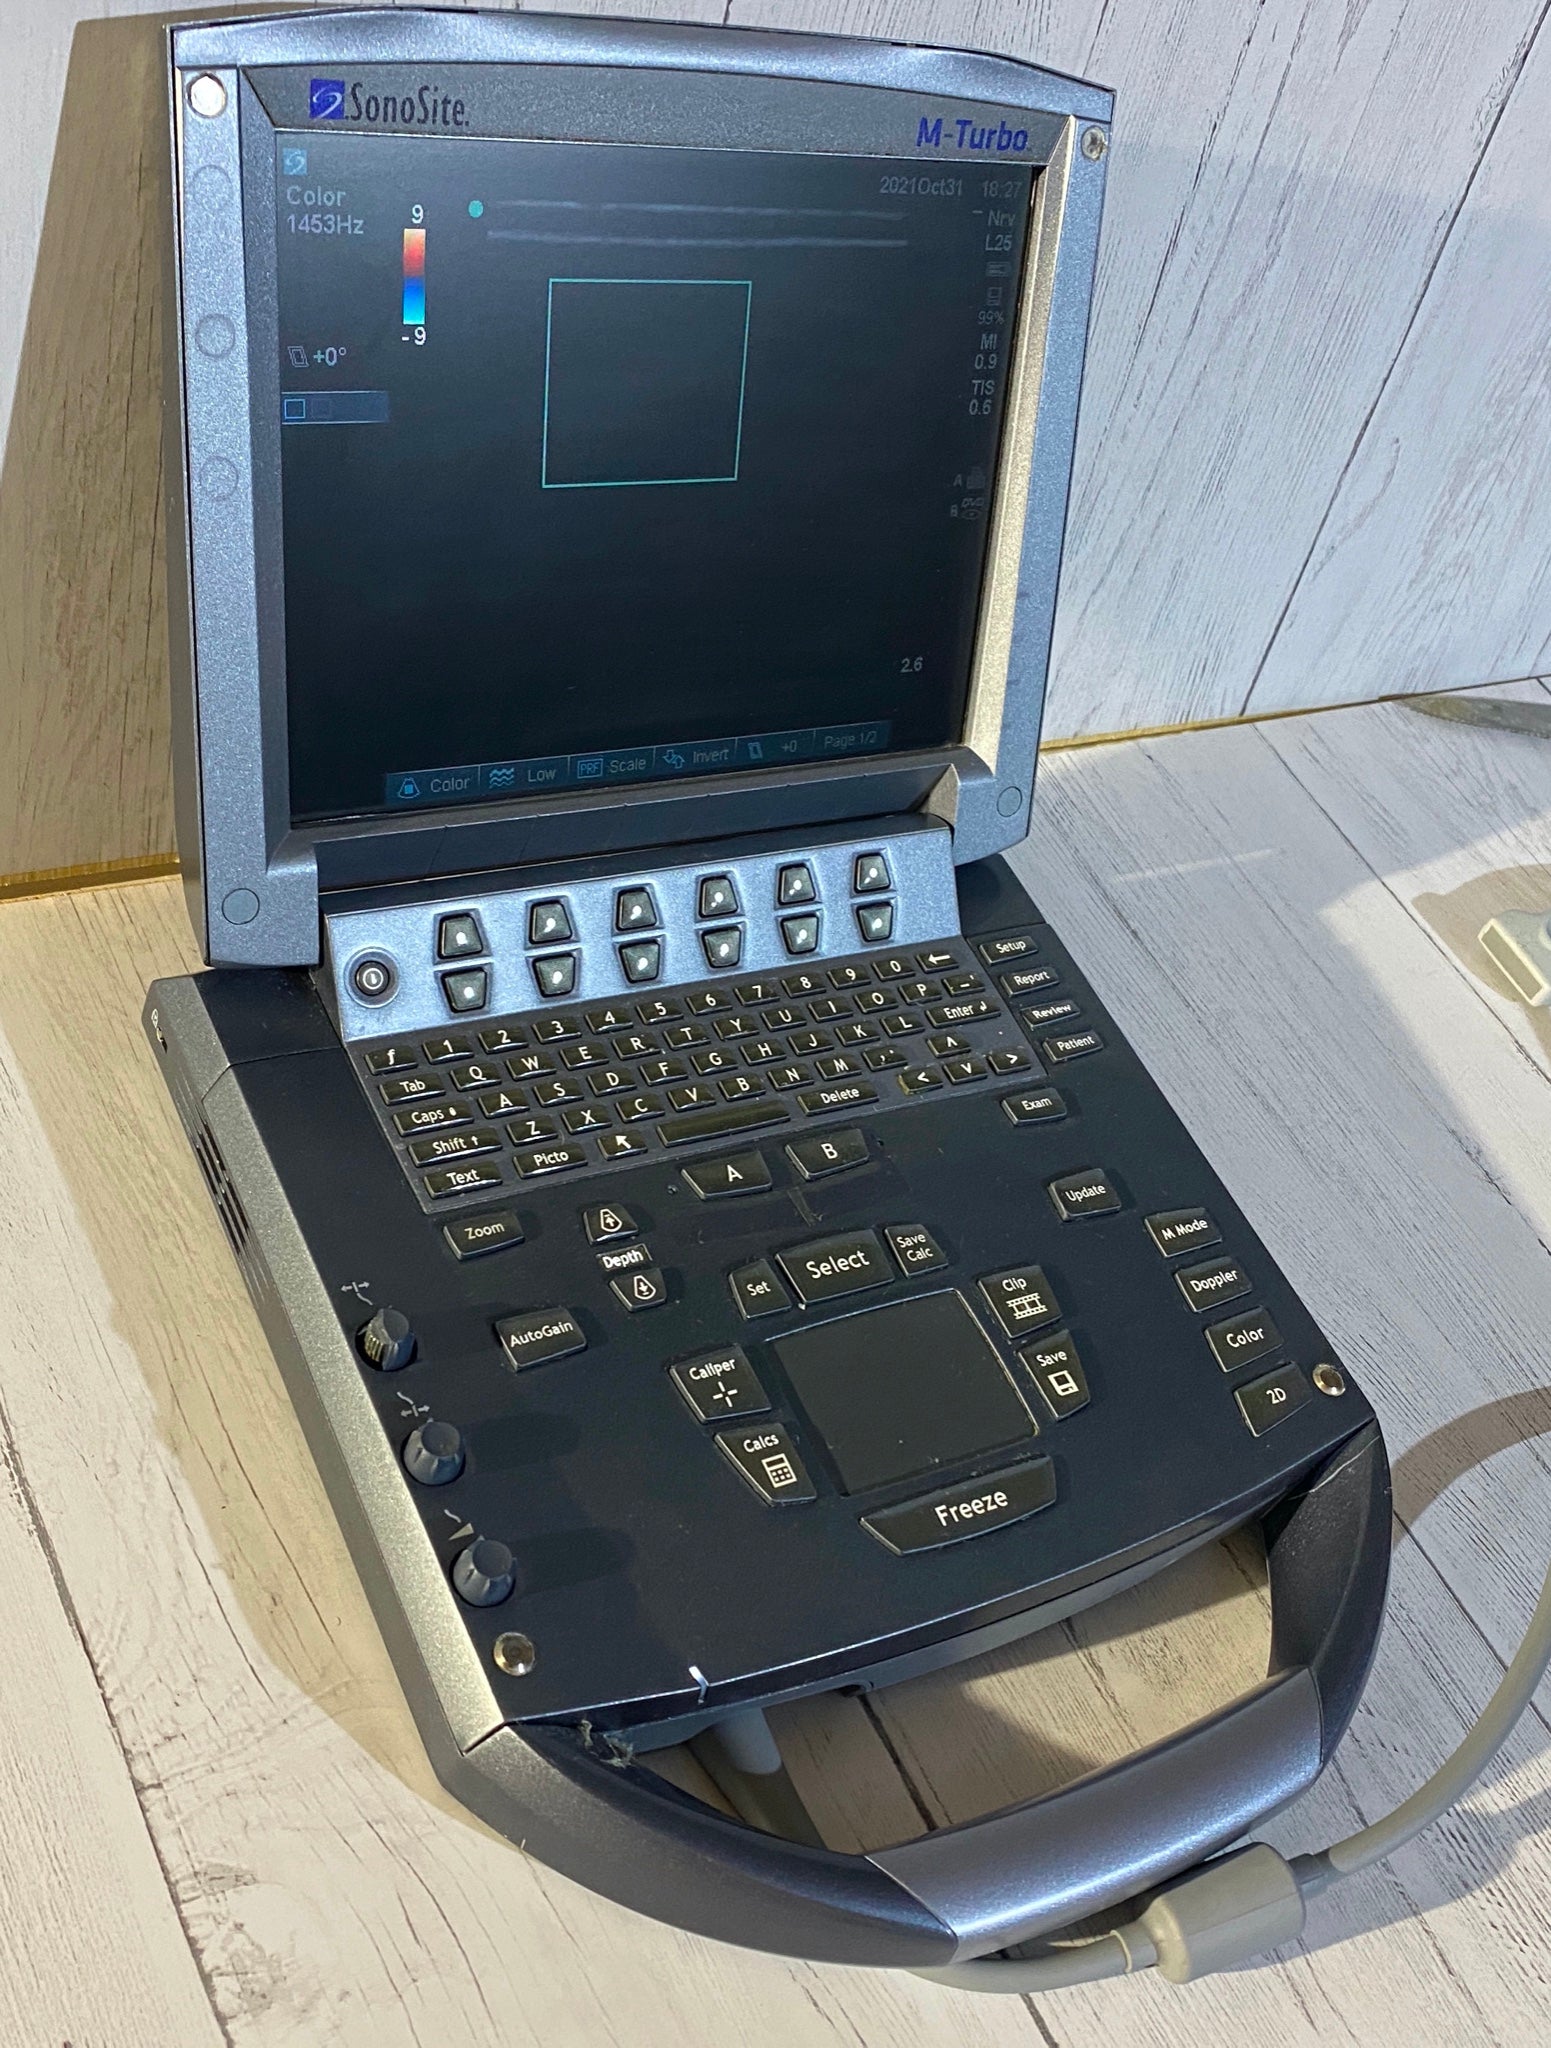 SonoSite M Turbo with one linear array probe L25 2008 DIAGNOSTIC ULTRASOUND MACHINES FOR SALE